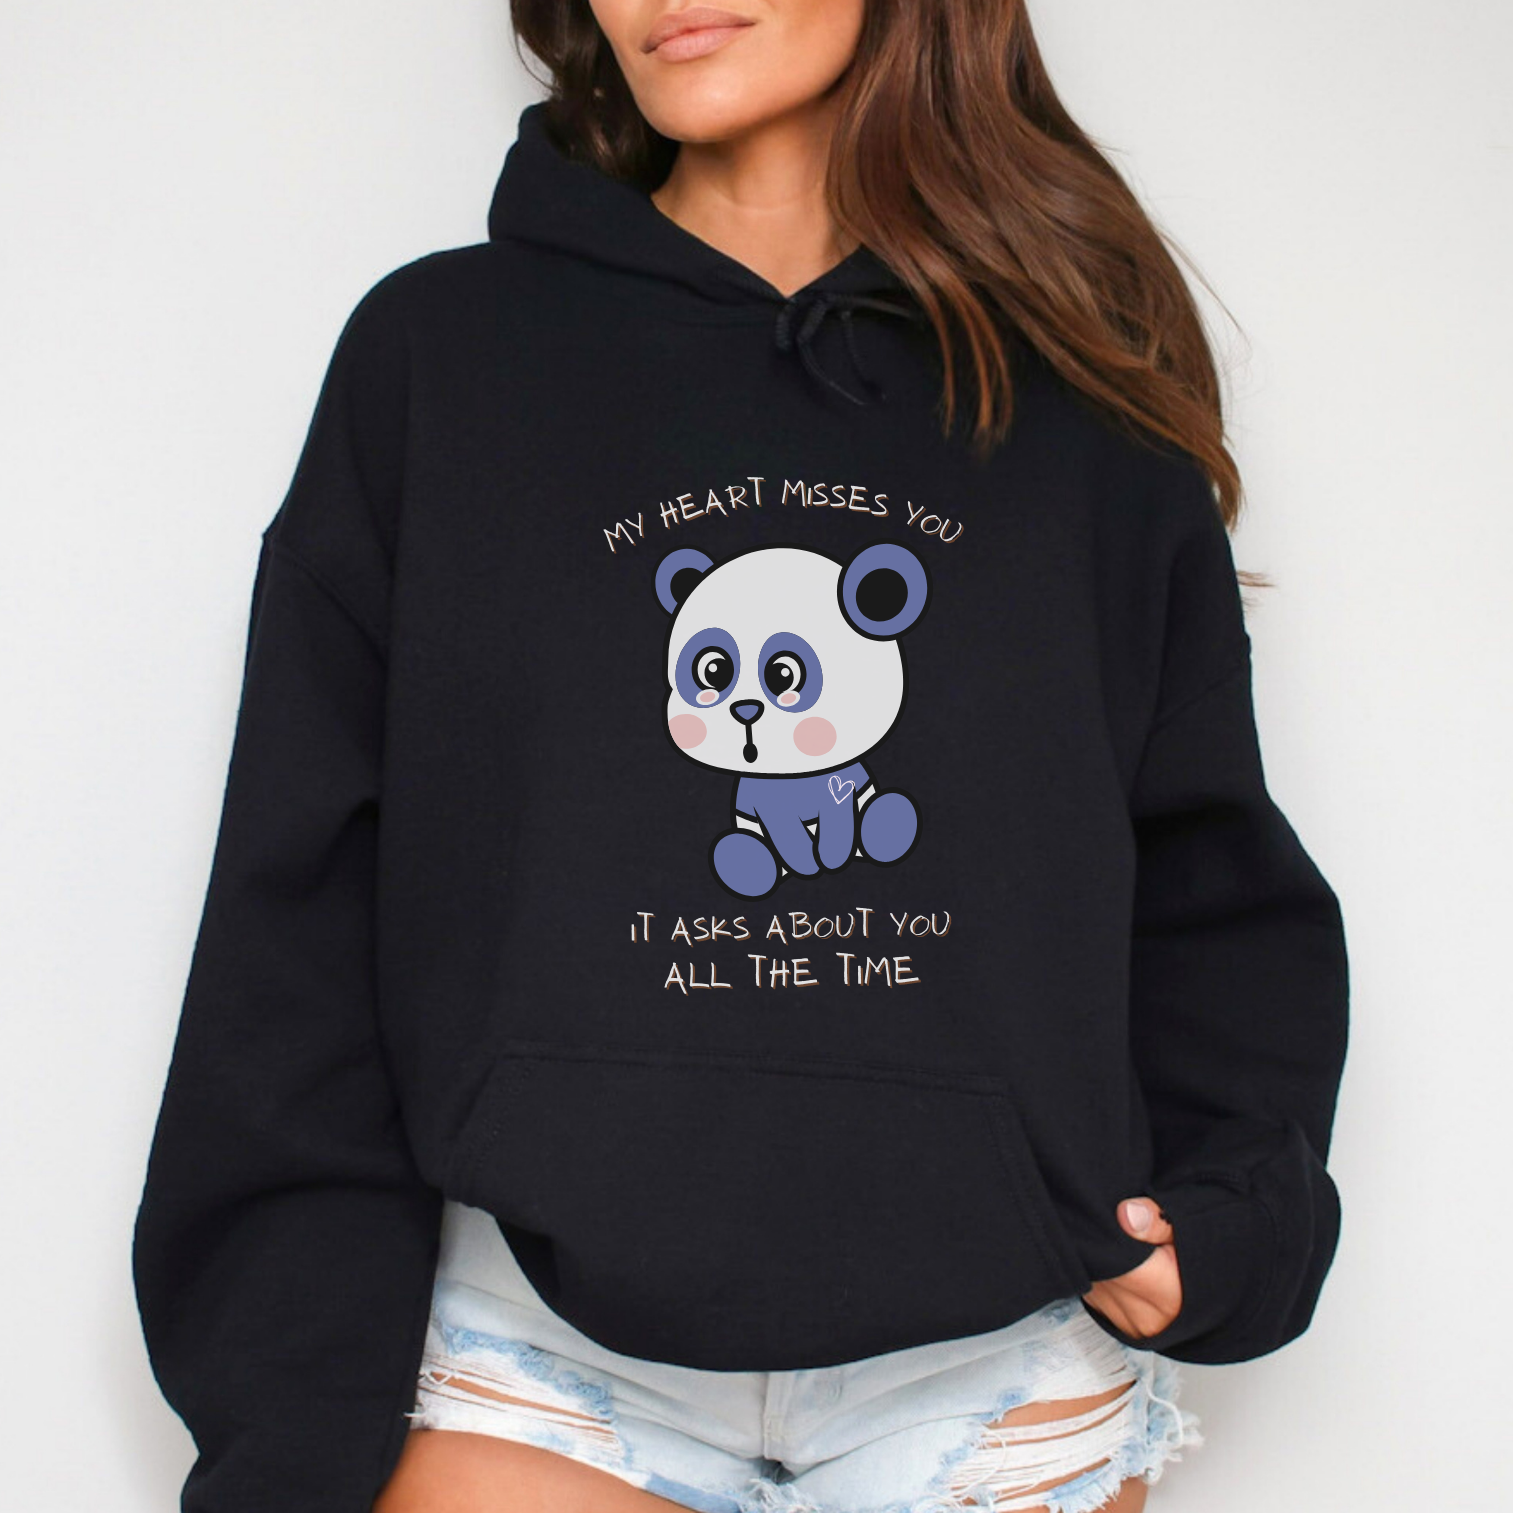 Wearable sentiment - "my heart misses you, it asks about you all the time" sweatshirt, with a lonely teddy bear that symbolizes love and loss. Color: Black